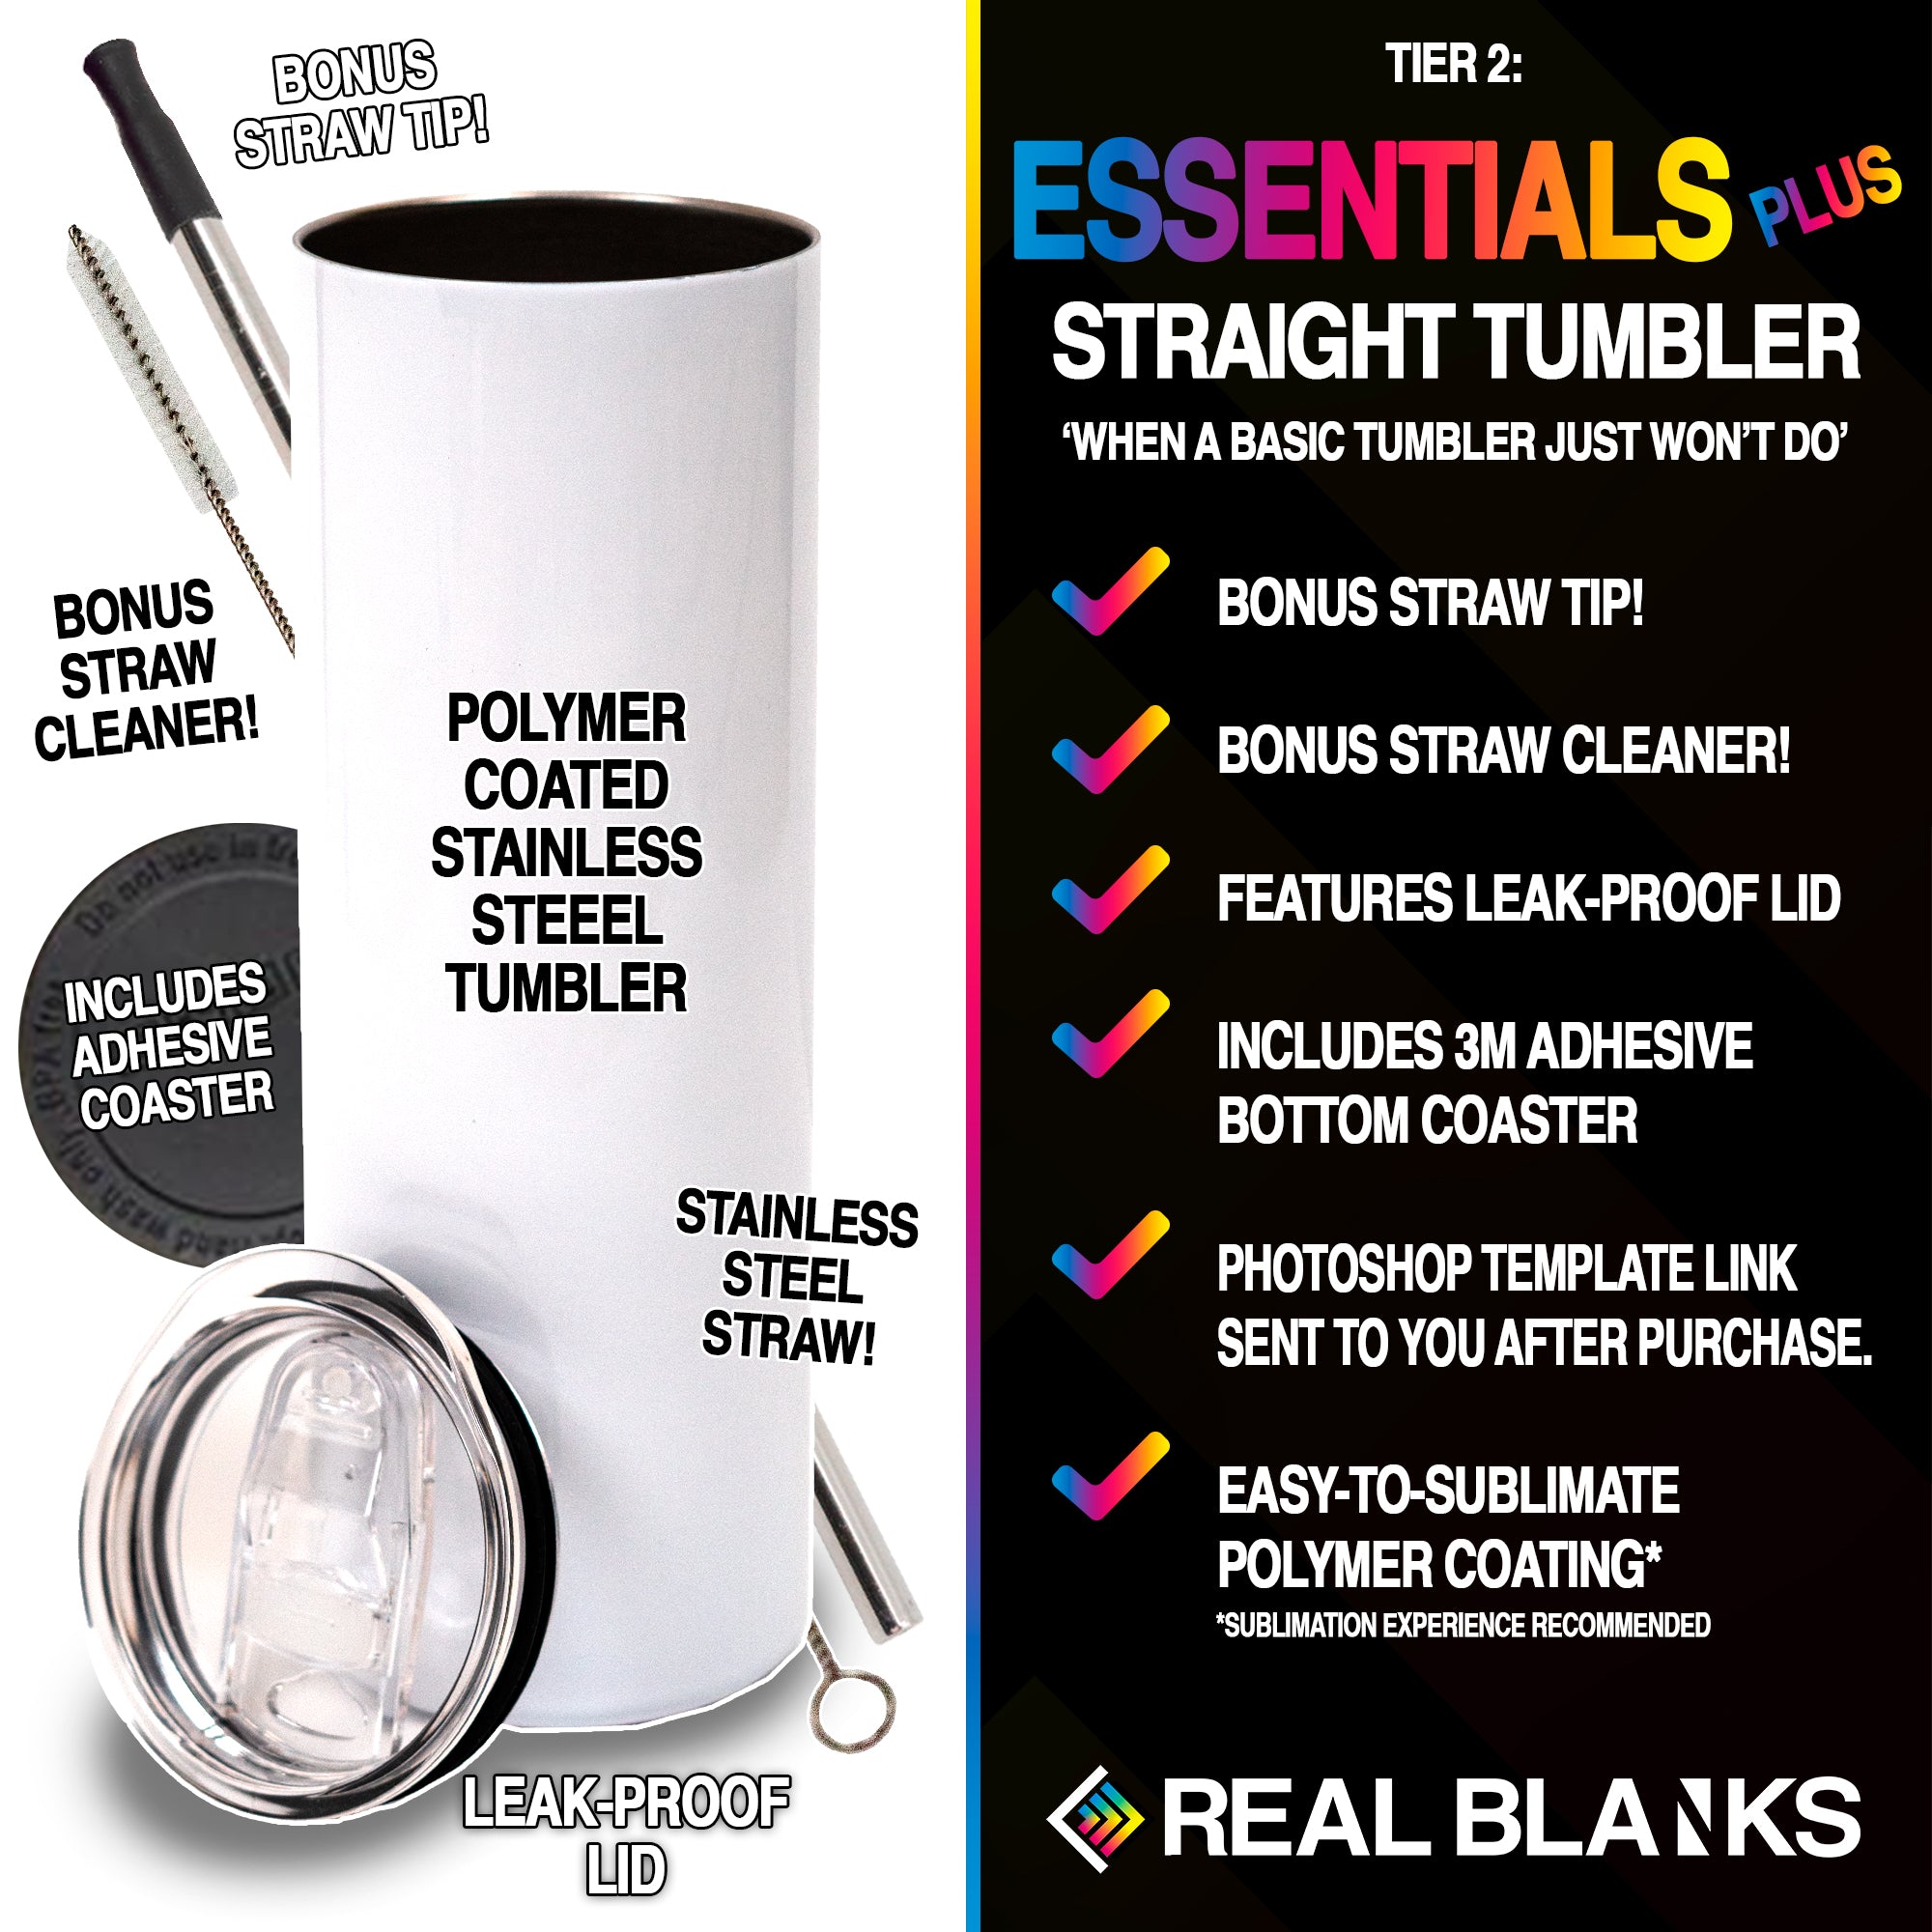 Types of sublimation tumblers. Tumbler sublimation has become